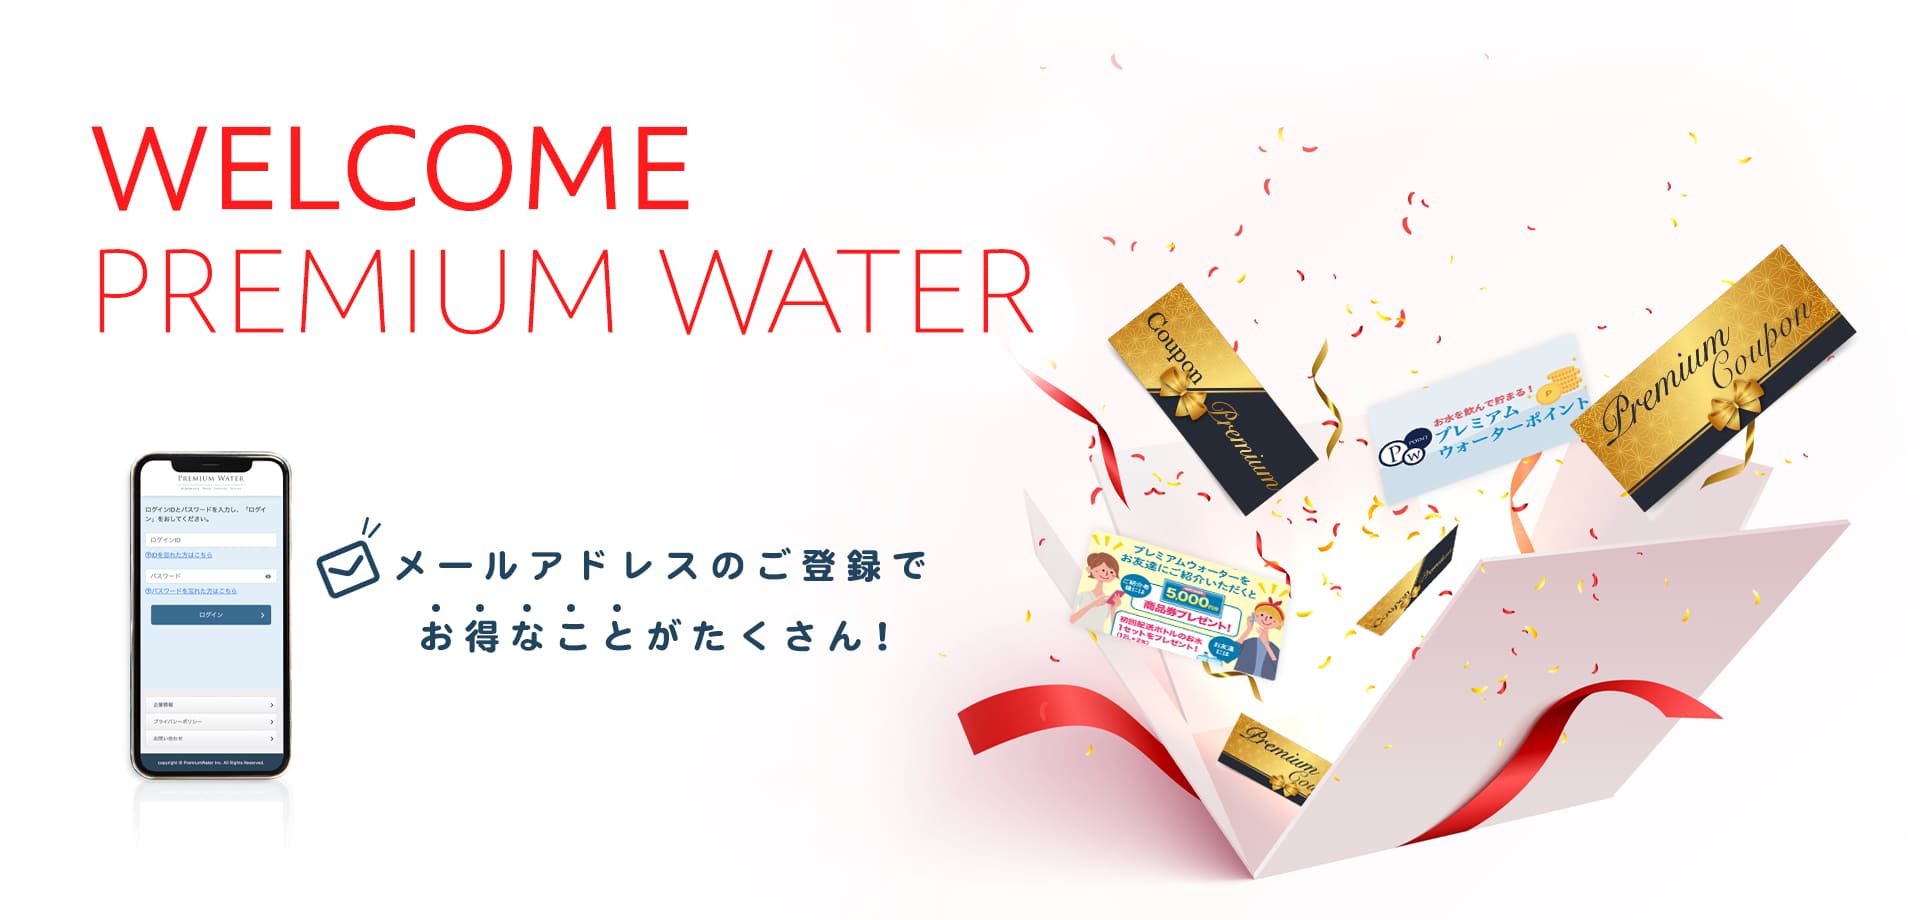 Welcome Premium Water